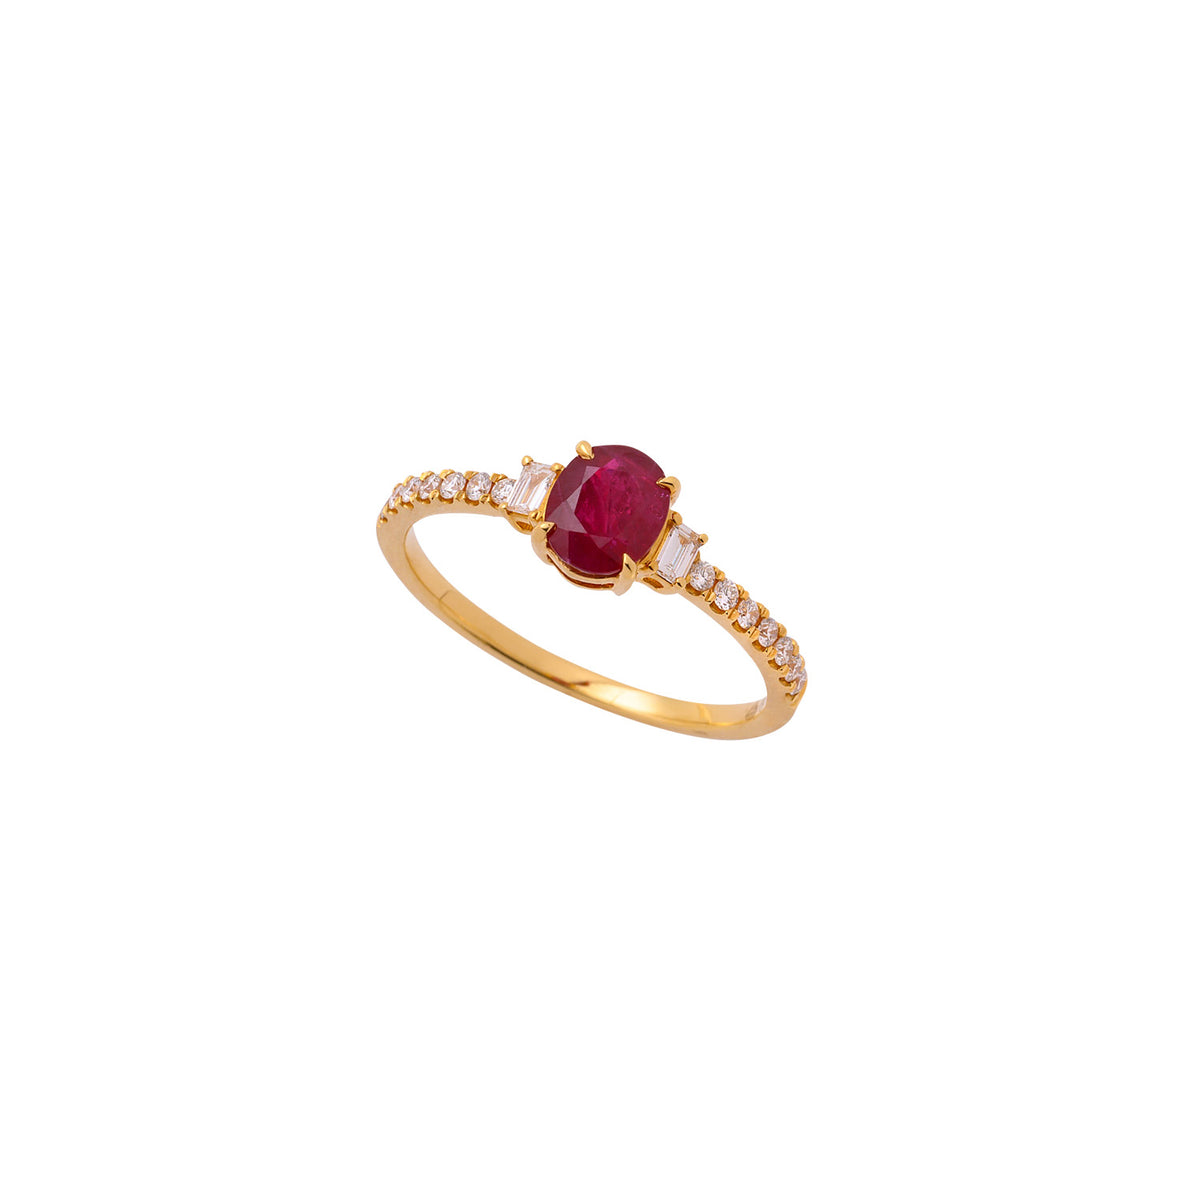 Ruby Ring. Diamond and Ruby ring. Gift ring. Gold ring. Diamond ring. Precious stone ring. High end ring. Anatol jewelry. Fine jewelry. Golden Hall. Kifissia. Step cut ring. Red Ruby. Fine jewelry. Ring. Engagement ring. Athens. Δαχτυλίδι με ρουμπίνι και διαμάντια. Δαχτυλίδι με κόκκινο ρουμπίνι και μπριγιάν.